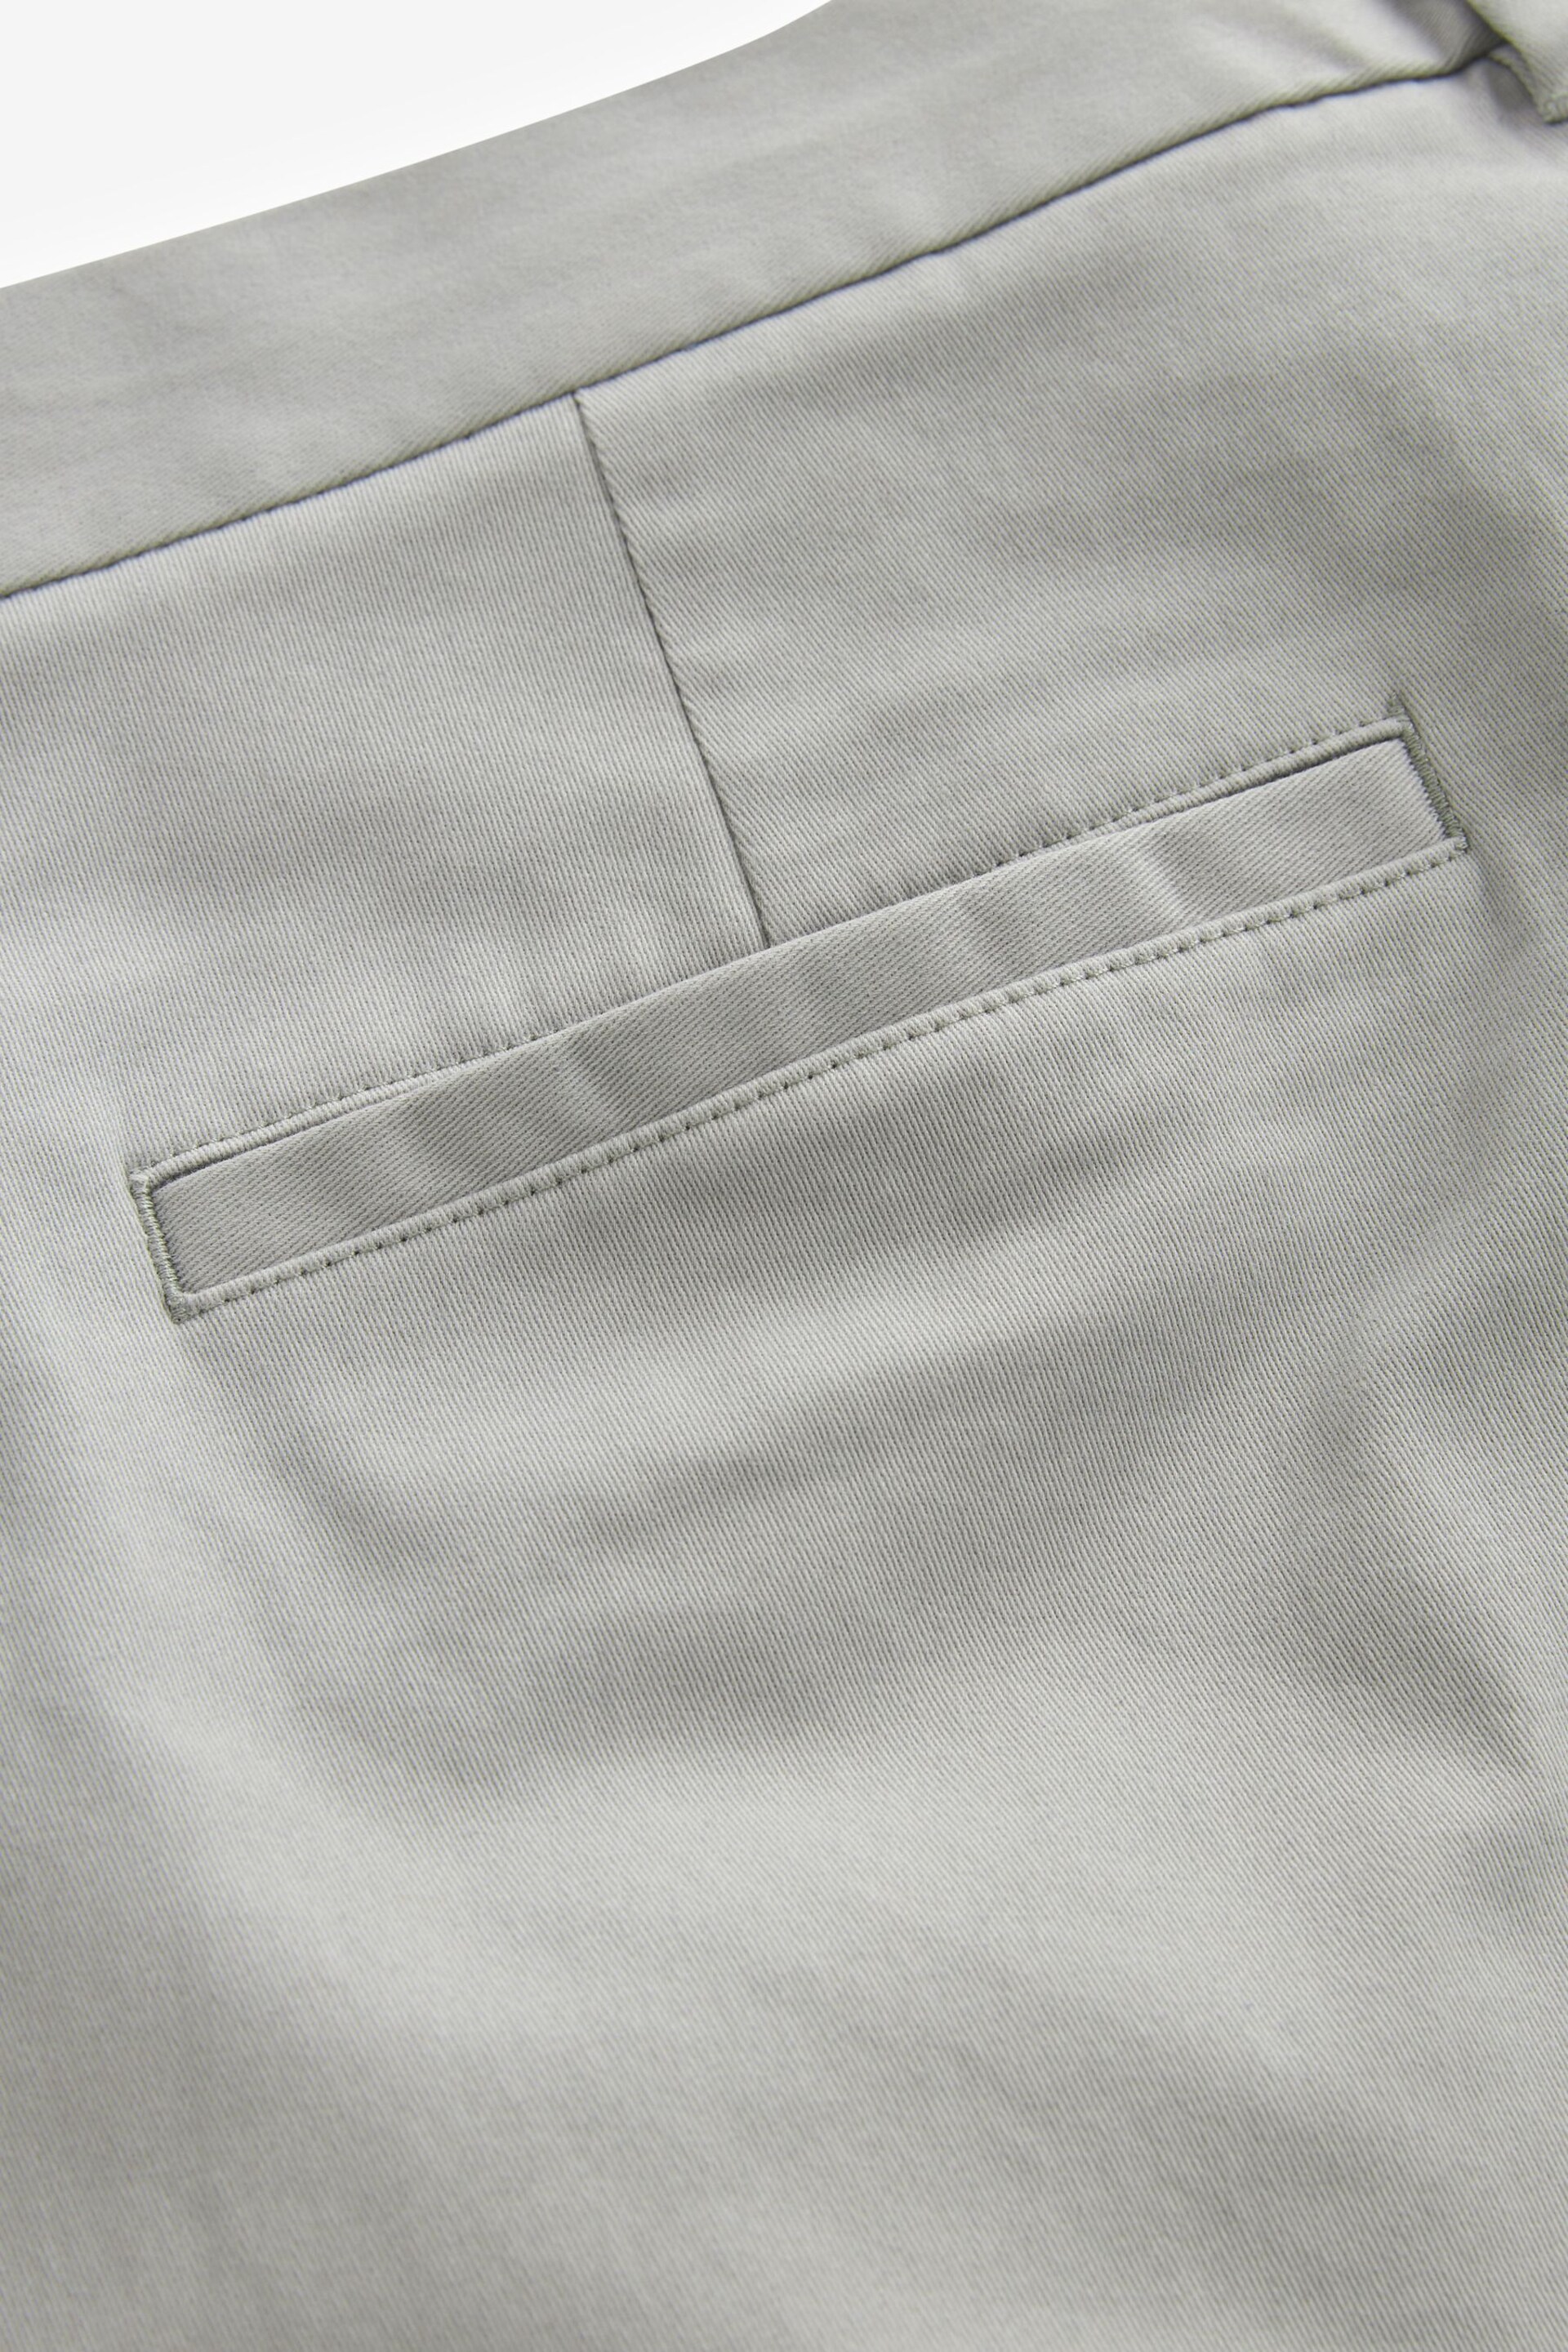 Mid Grey Relaxed Fit Stretch Chino Trousers - Image 5 of 5